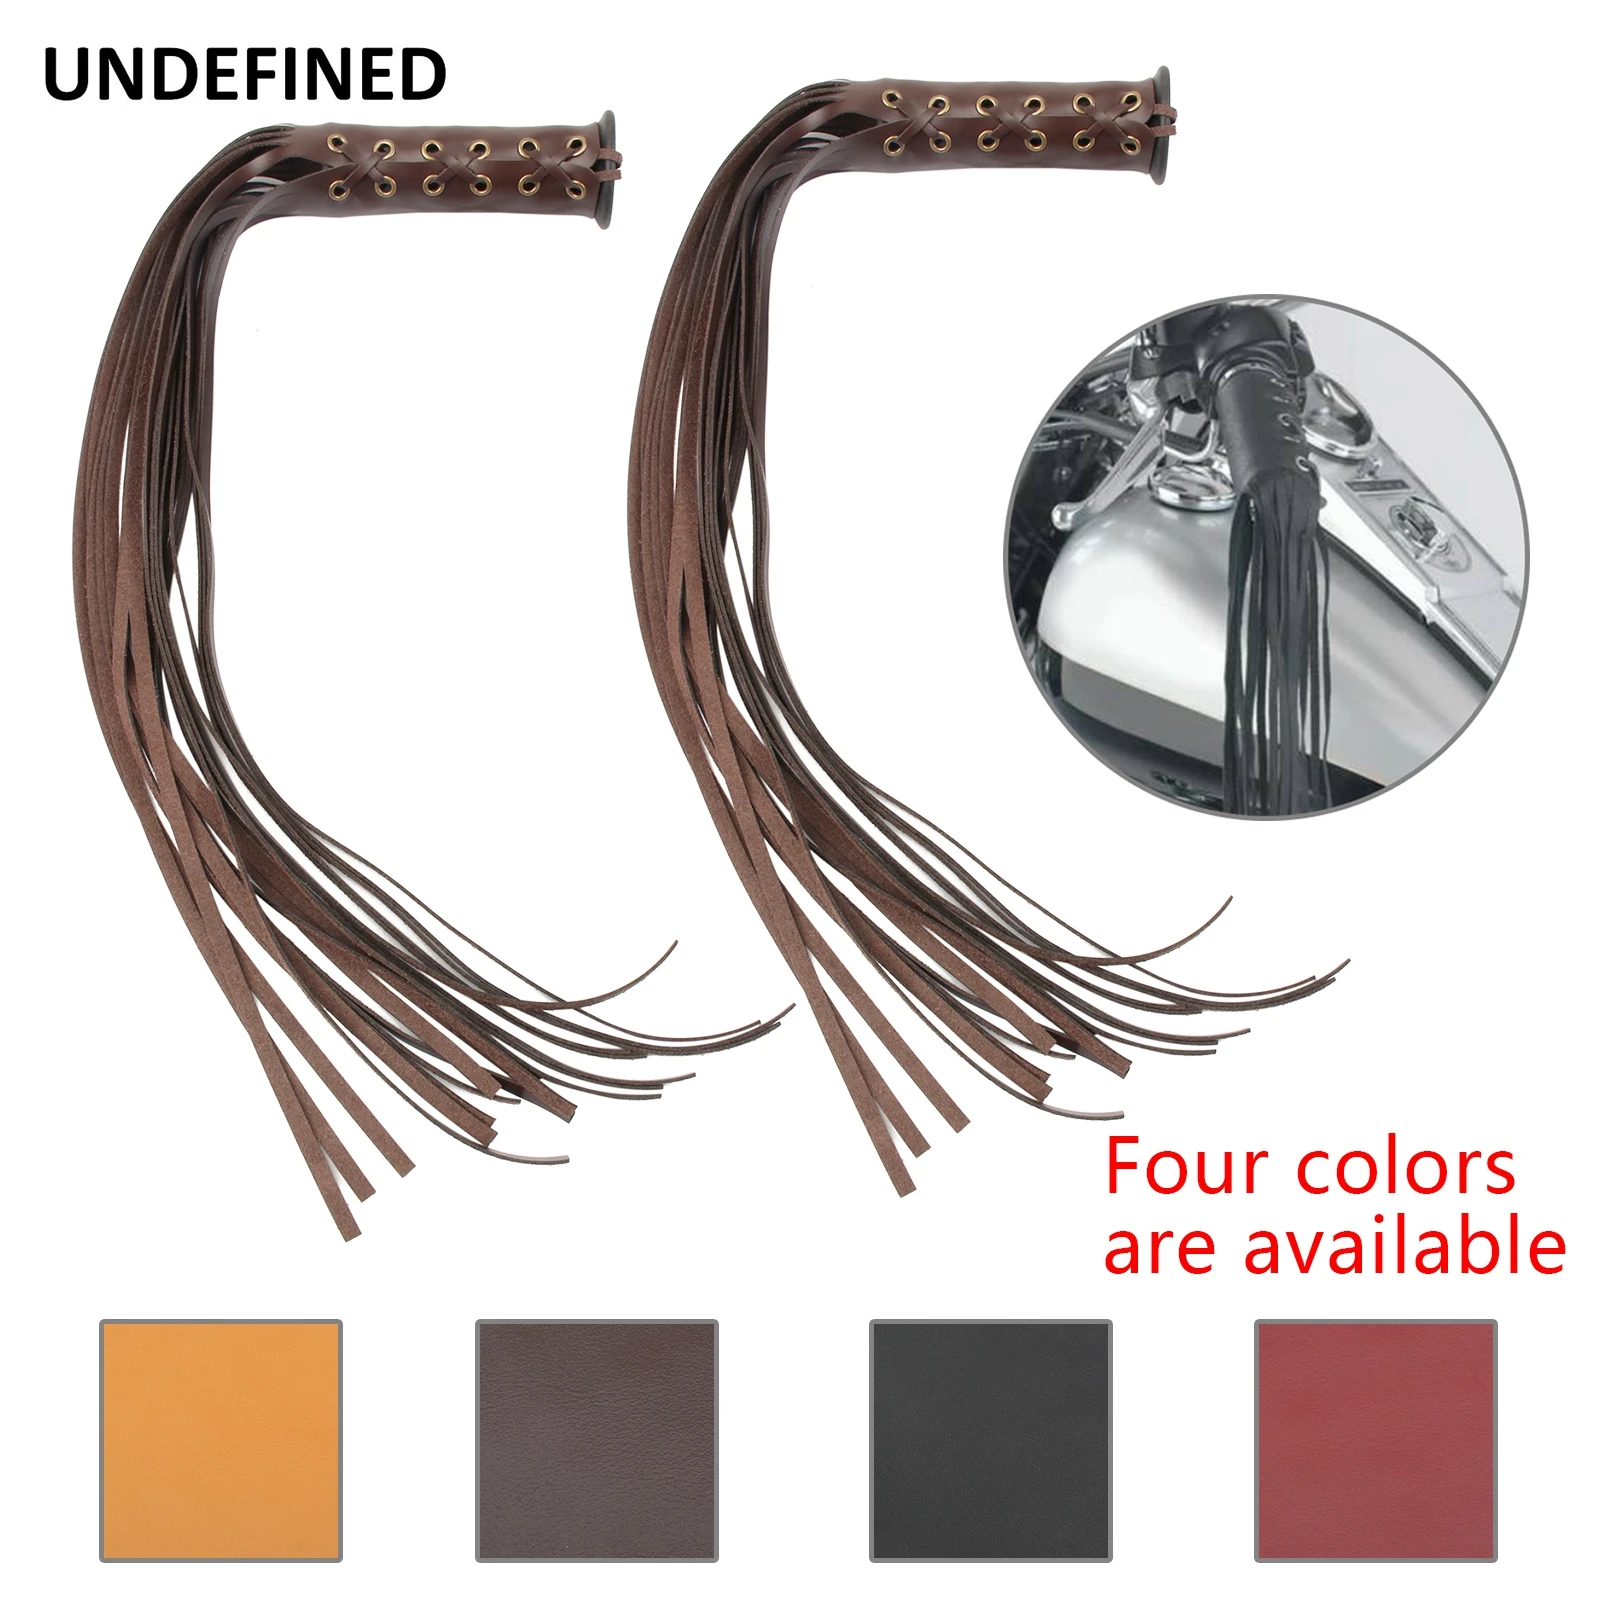 

Motorcycle Hand Grips Cover Leather Tassel Fringe Handlebar Covers 22mm 25mm for Indian Chief Classic Chopper Bobber universal